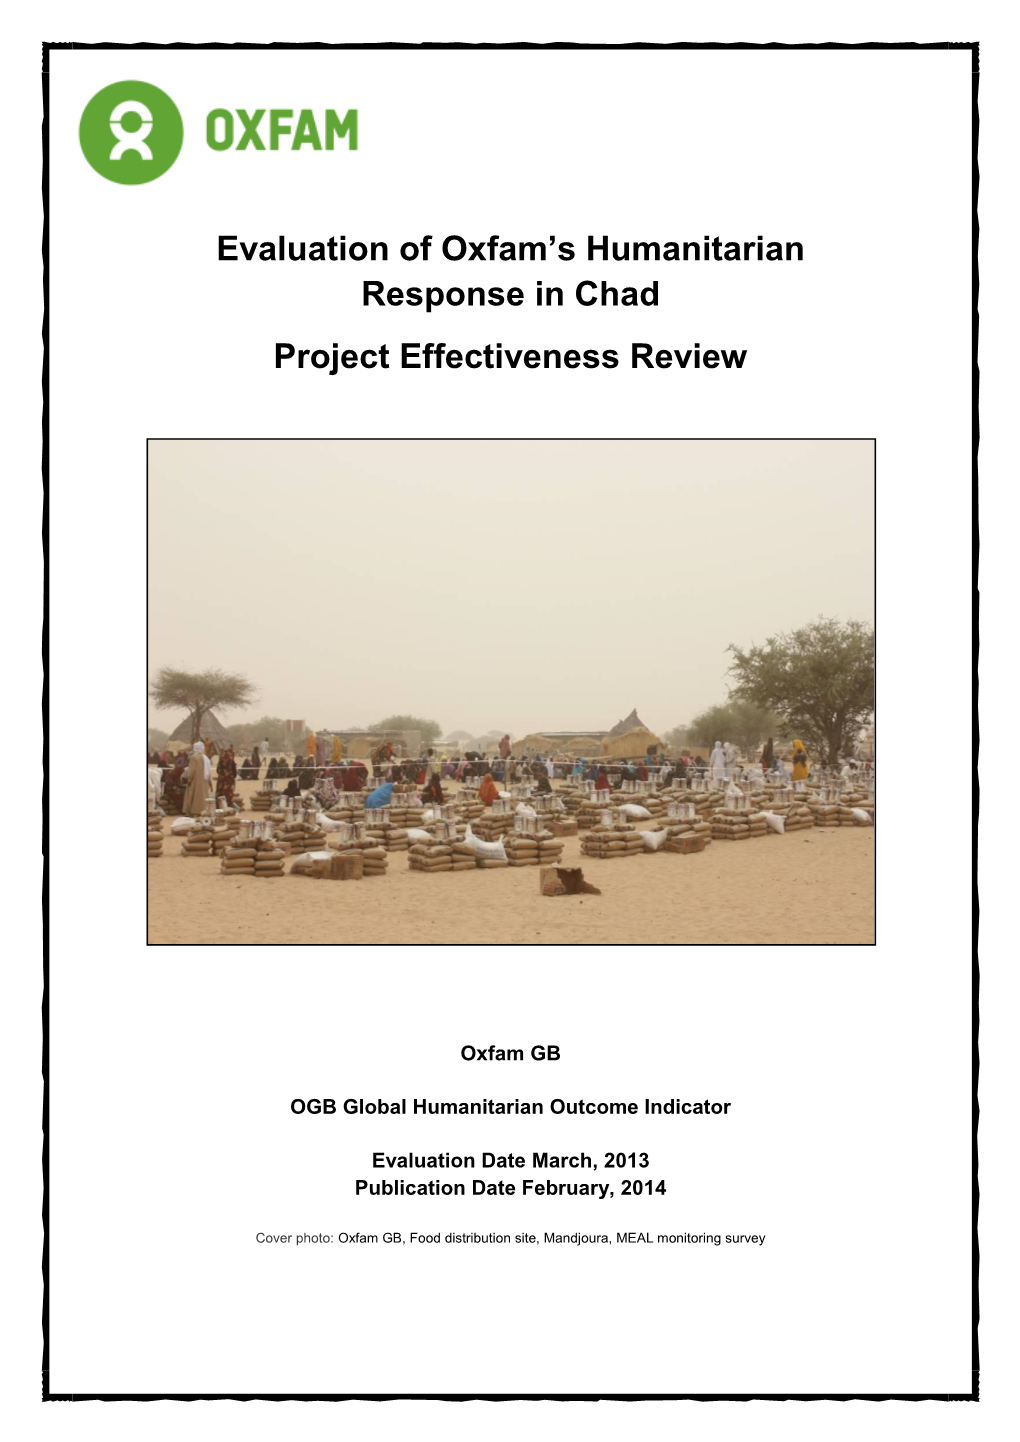 Evaluation of Oxfam's Humanitarian Response in Chad